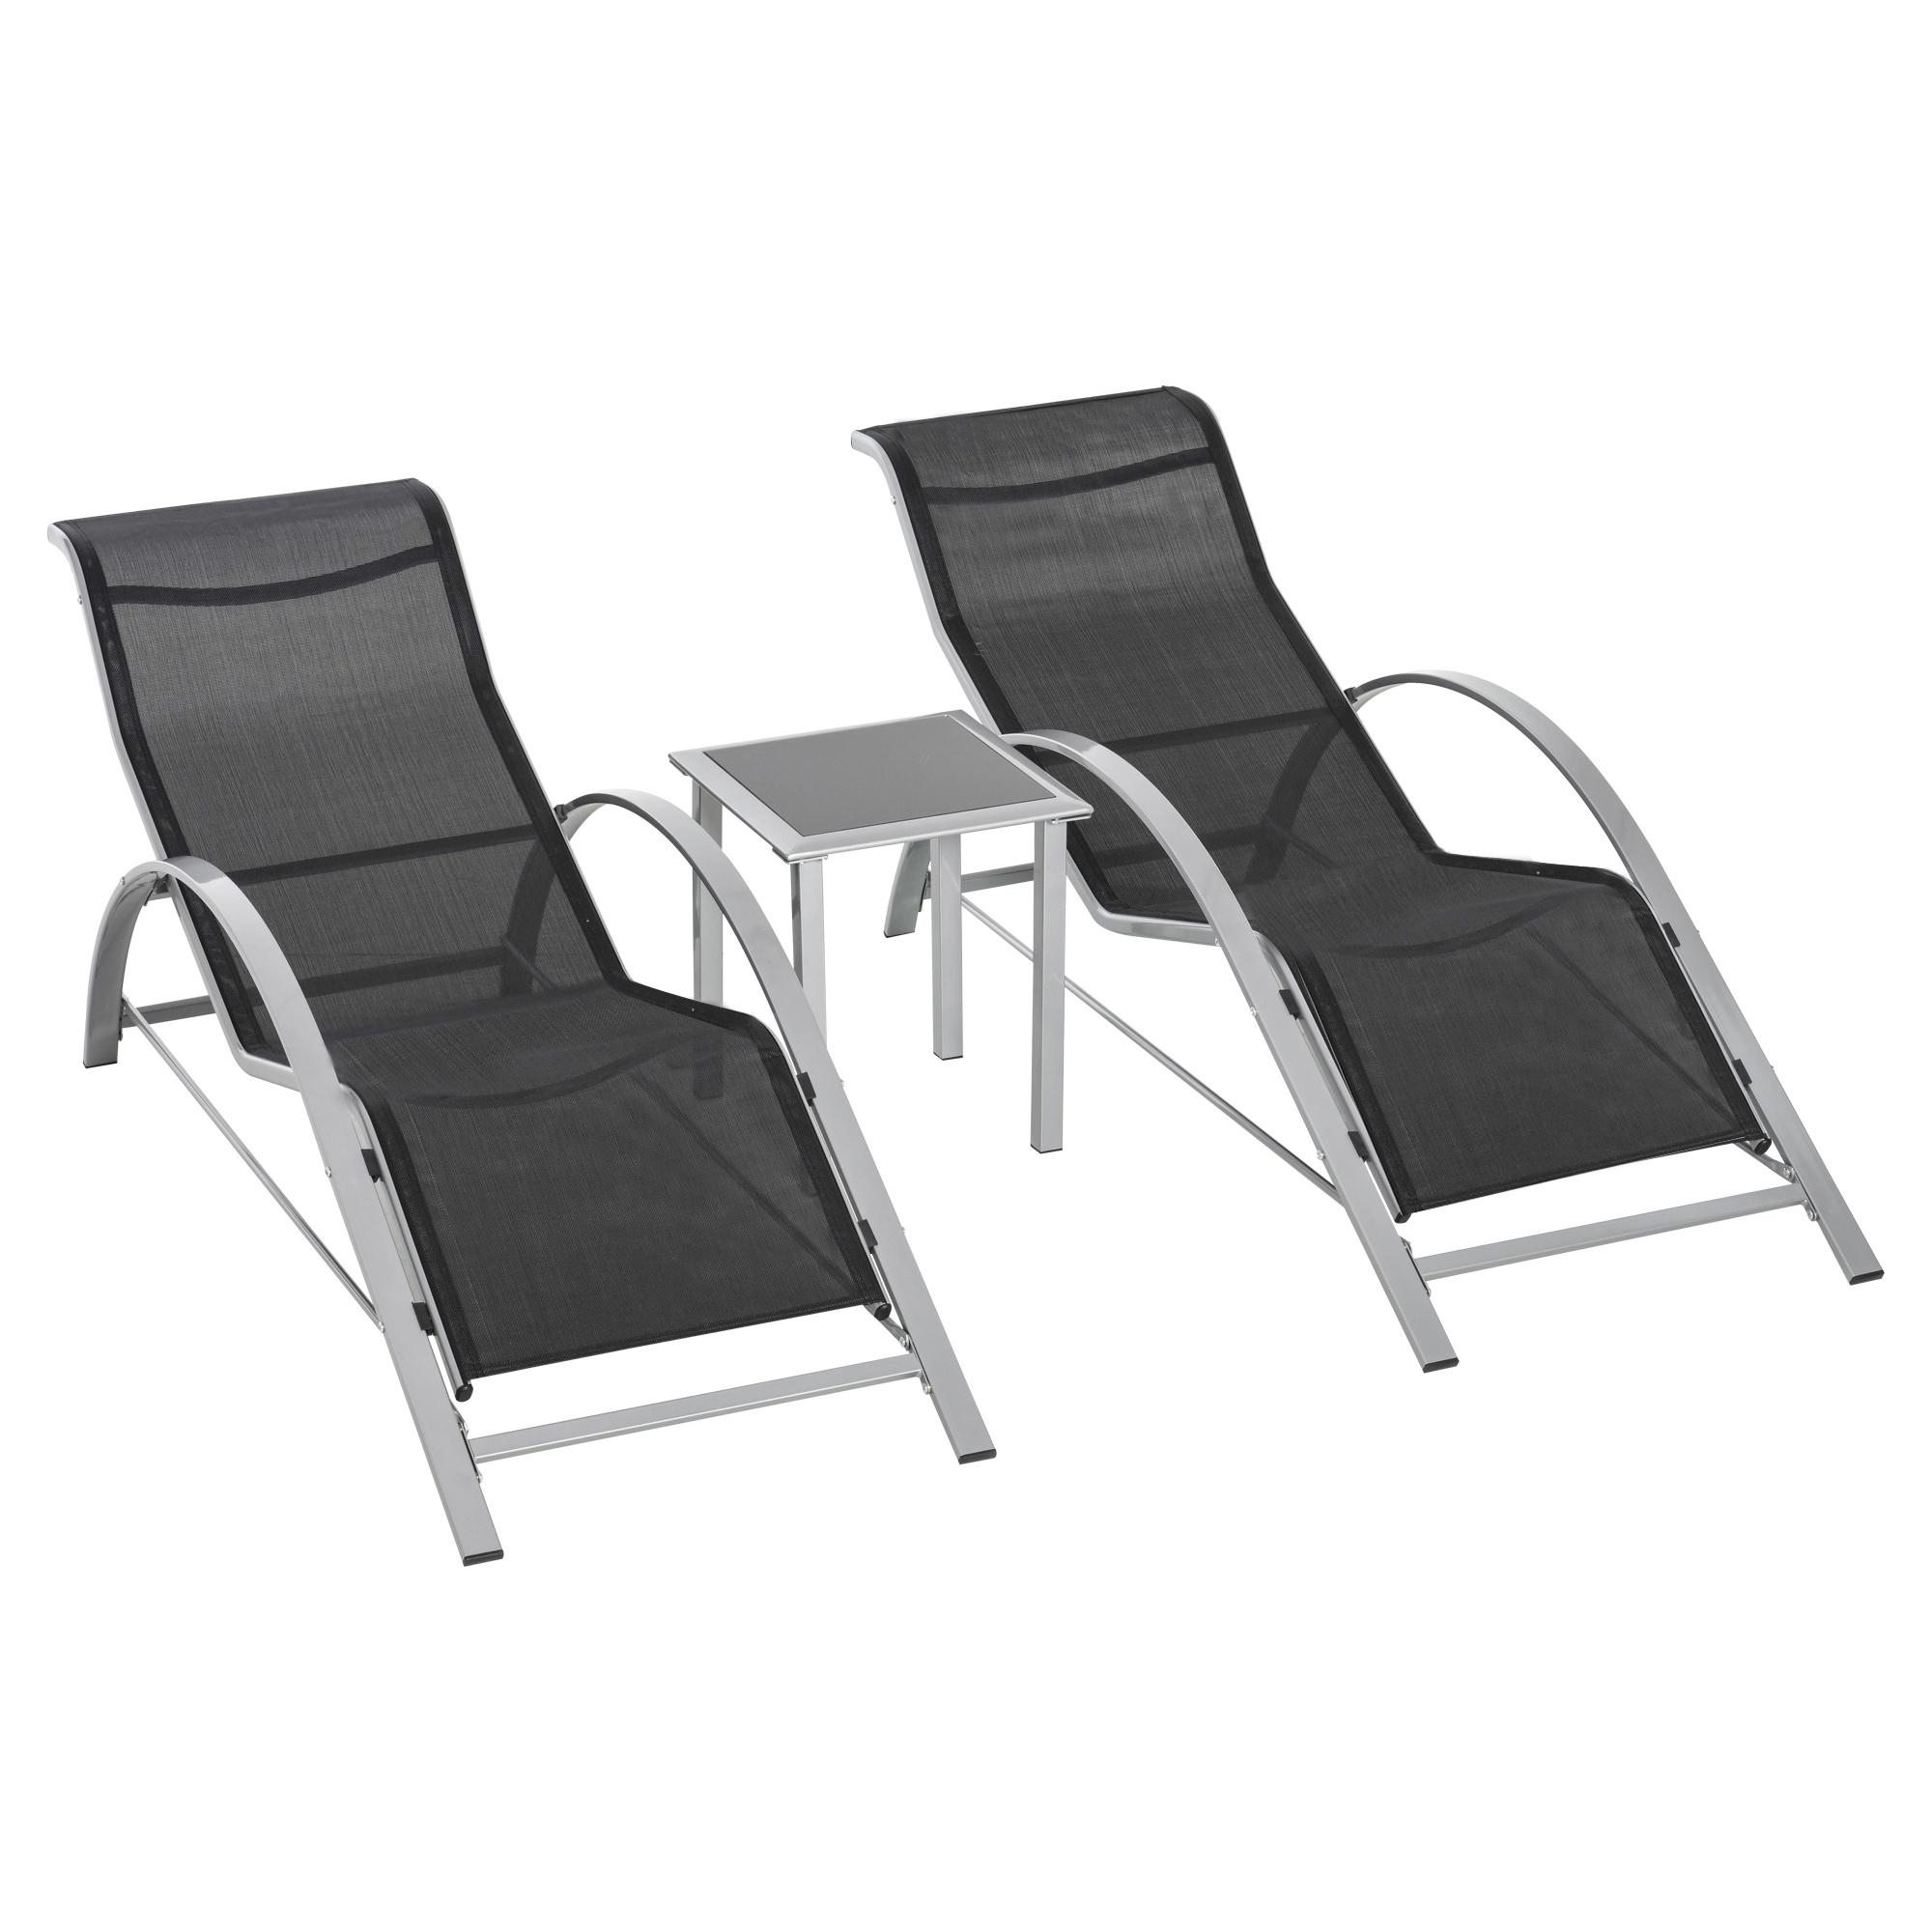 3 Pieces Patio Lounge Chair Set with Glass Top Table